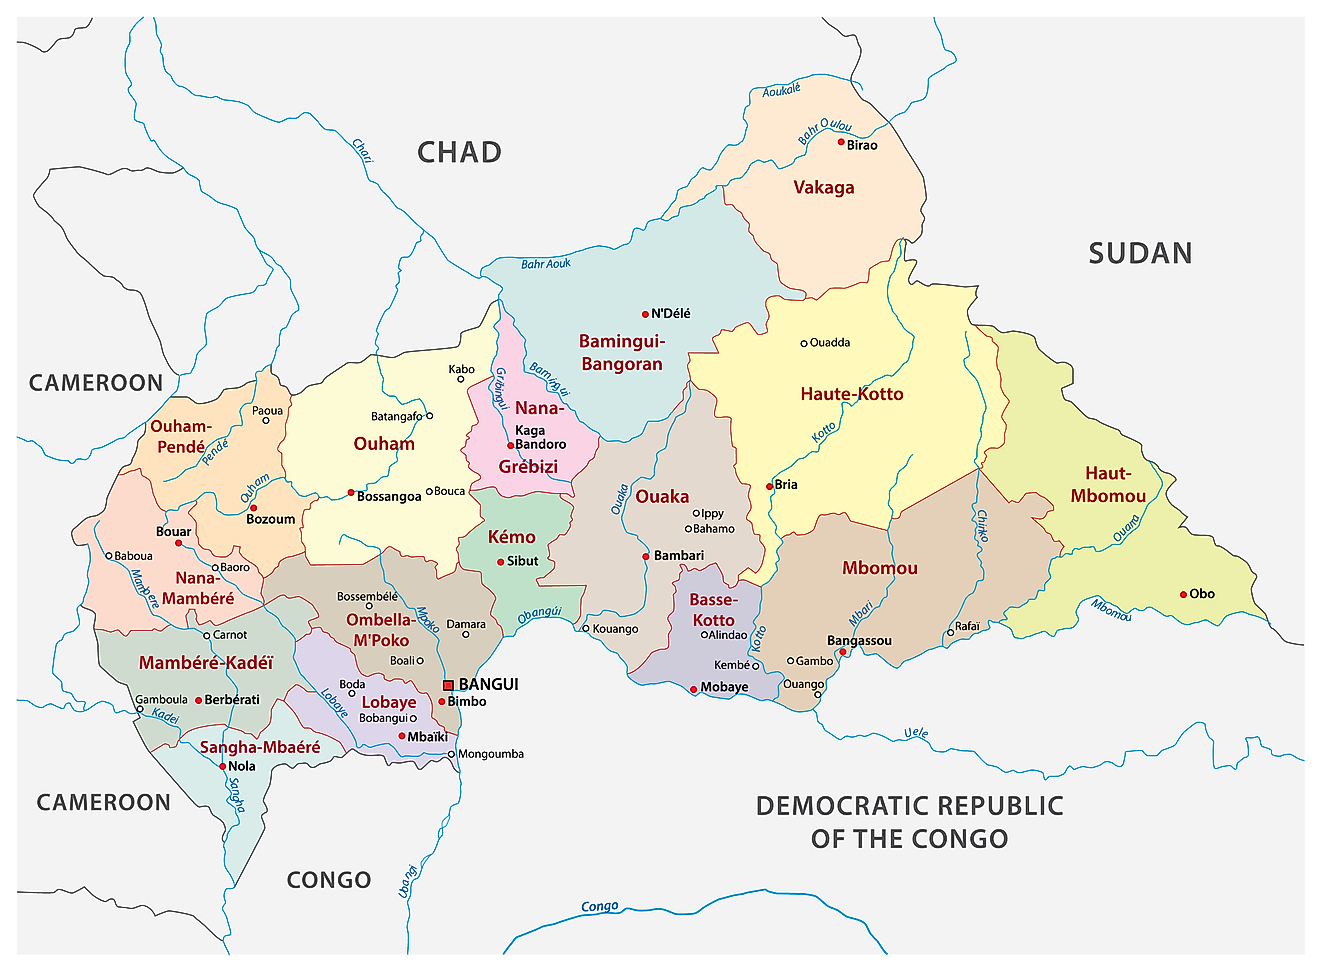 Political Map of Central African Republic showing 14 prefectures, their capitals, and the commune of Bangui, the national capital.